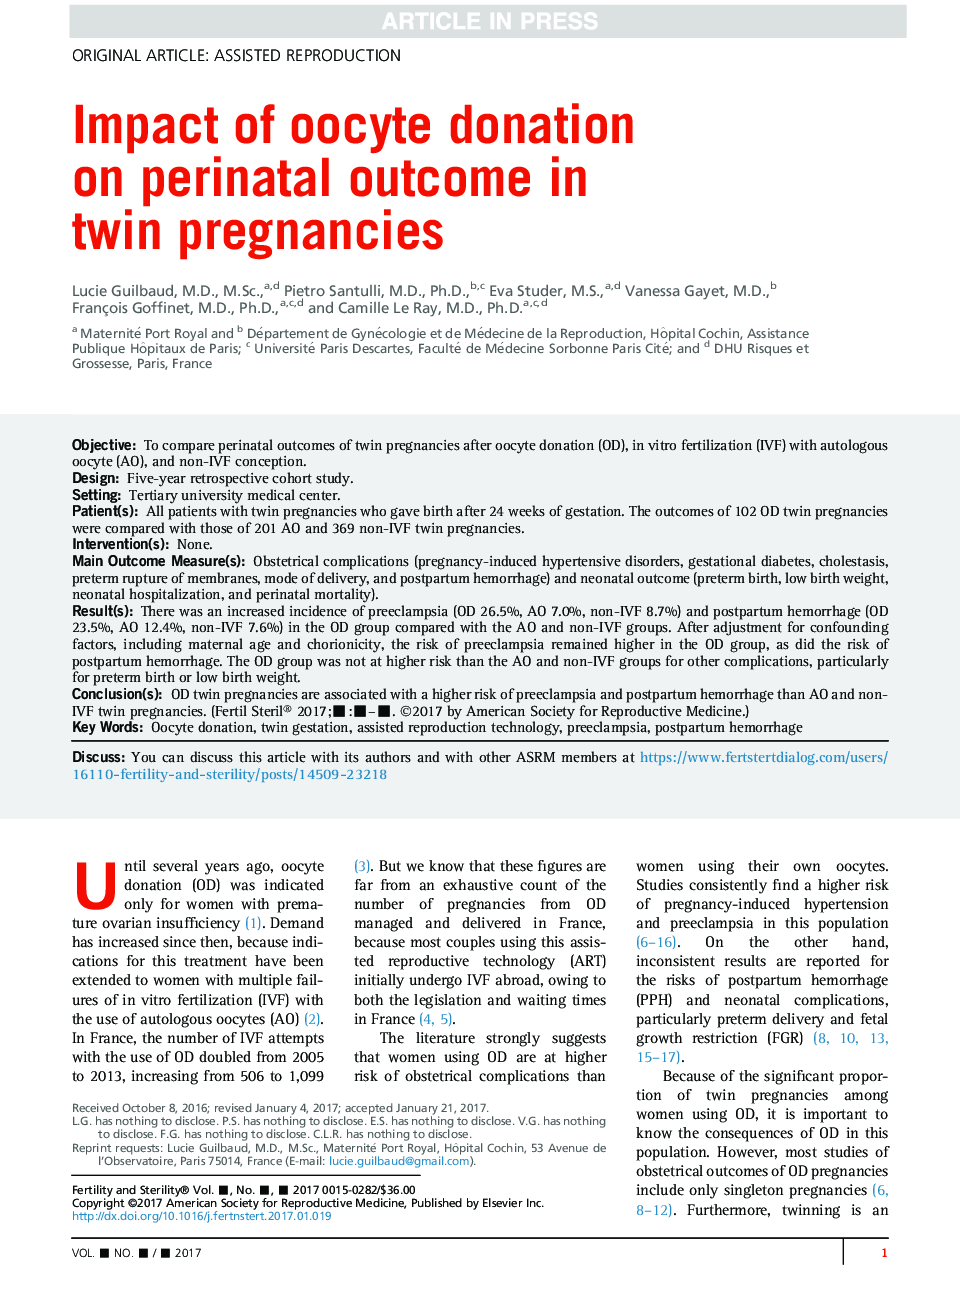 Impact of oocyte donation onÂ perinatal outcome in twin pregnancies